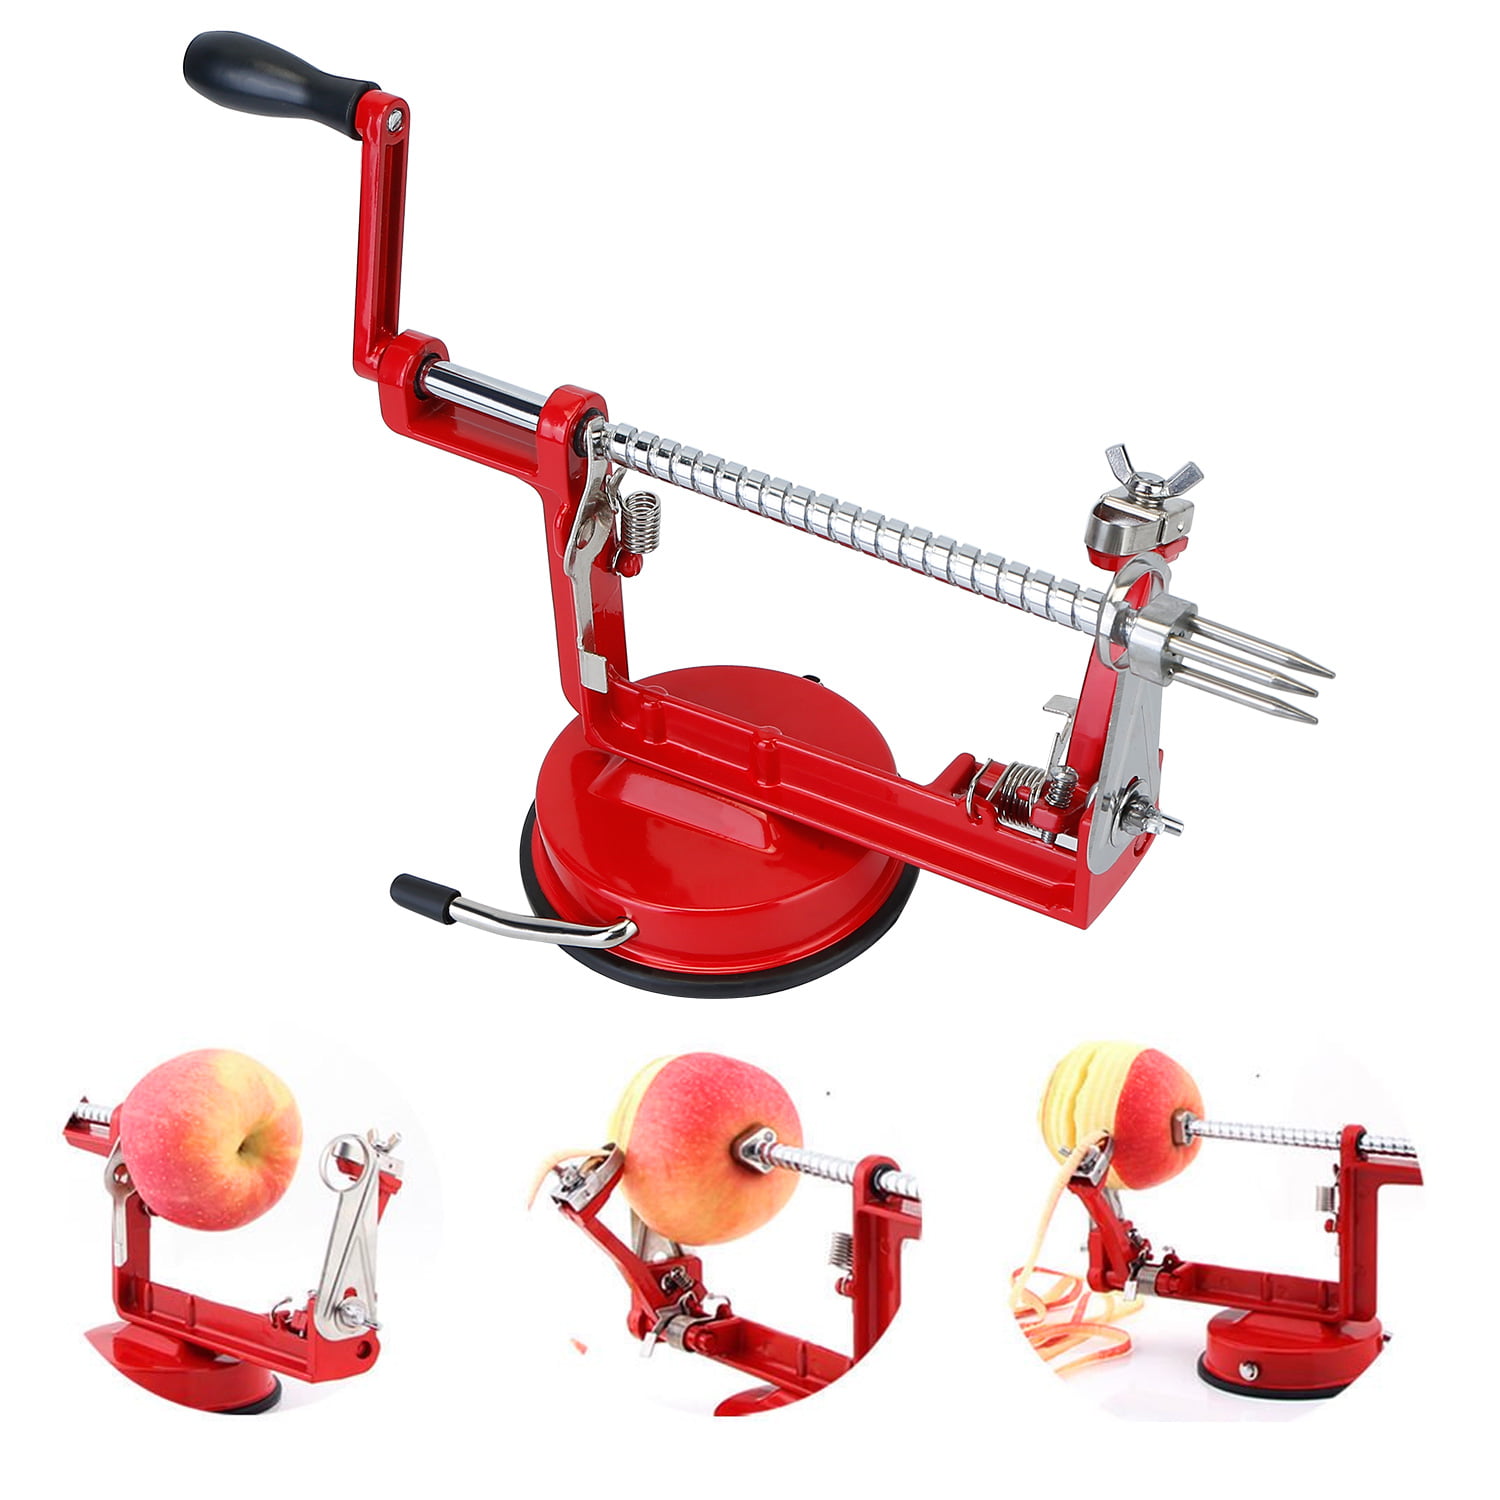 1 Apple Peeler For Kitchenaid Images, Stock Photos, 3D objects